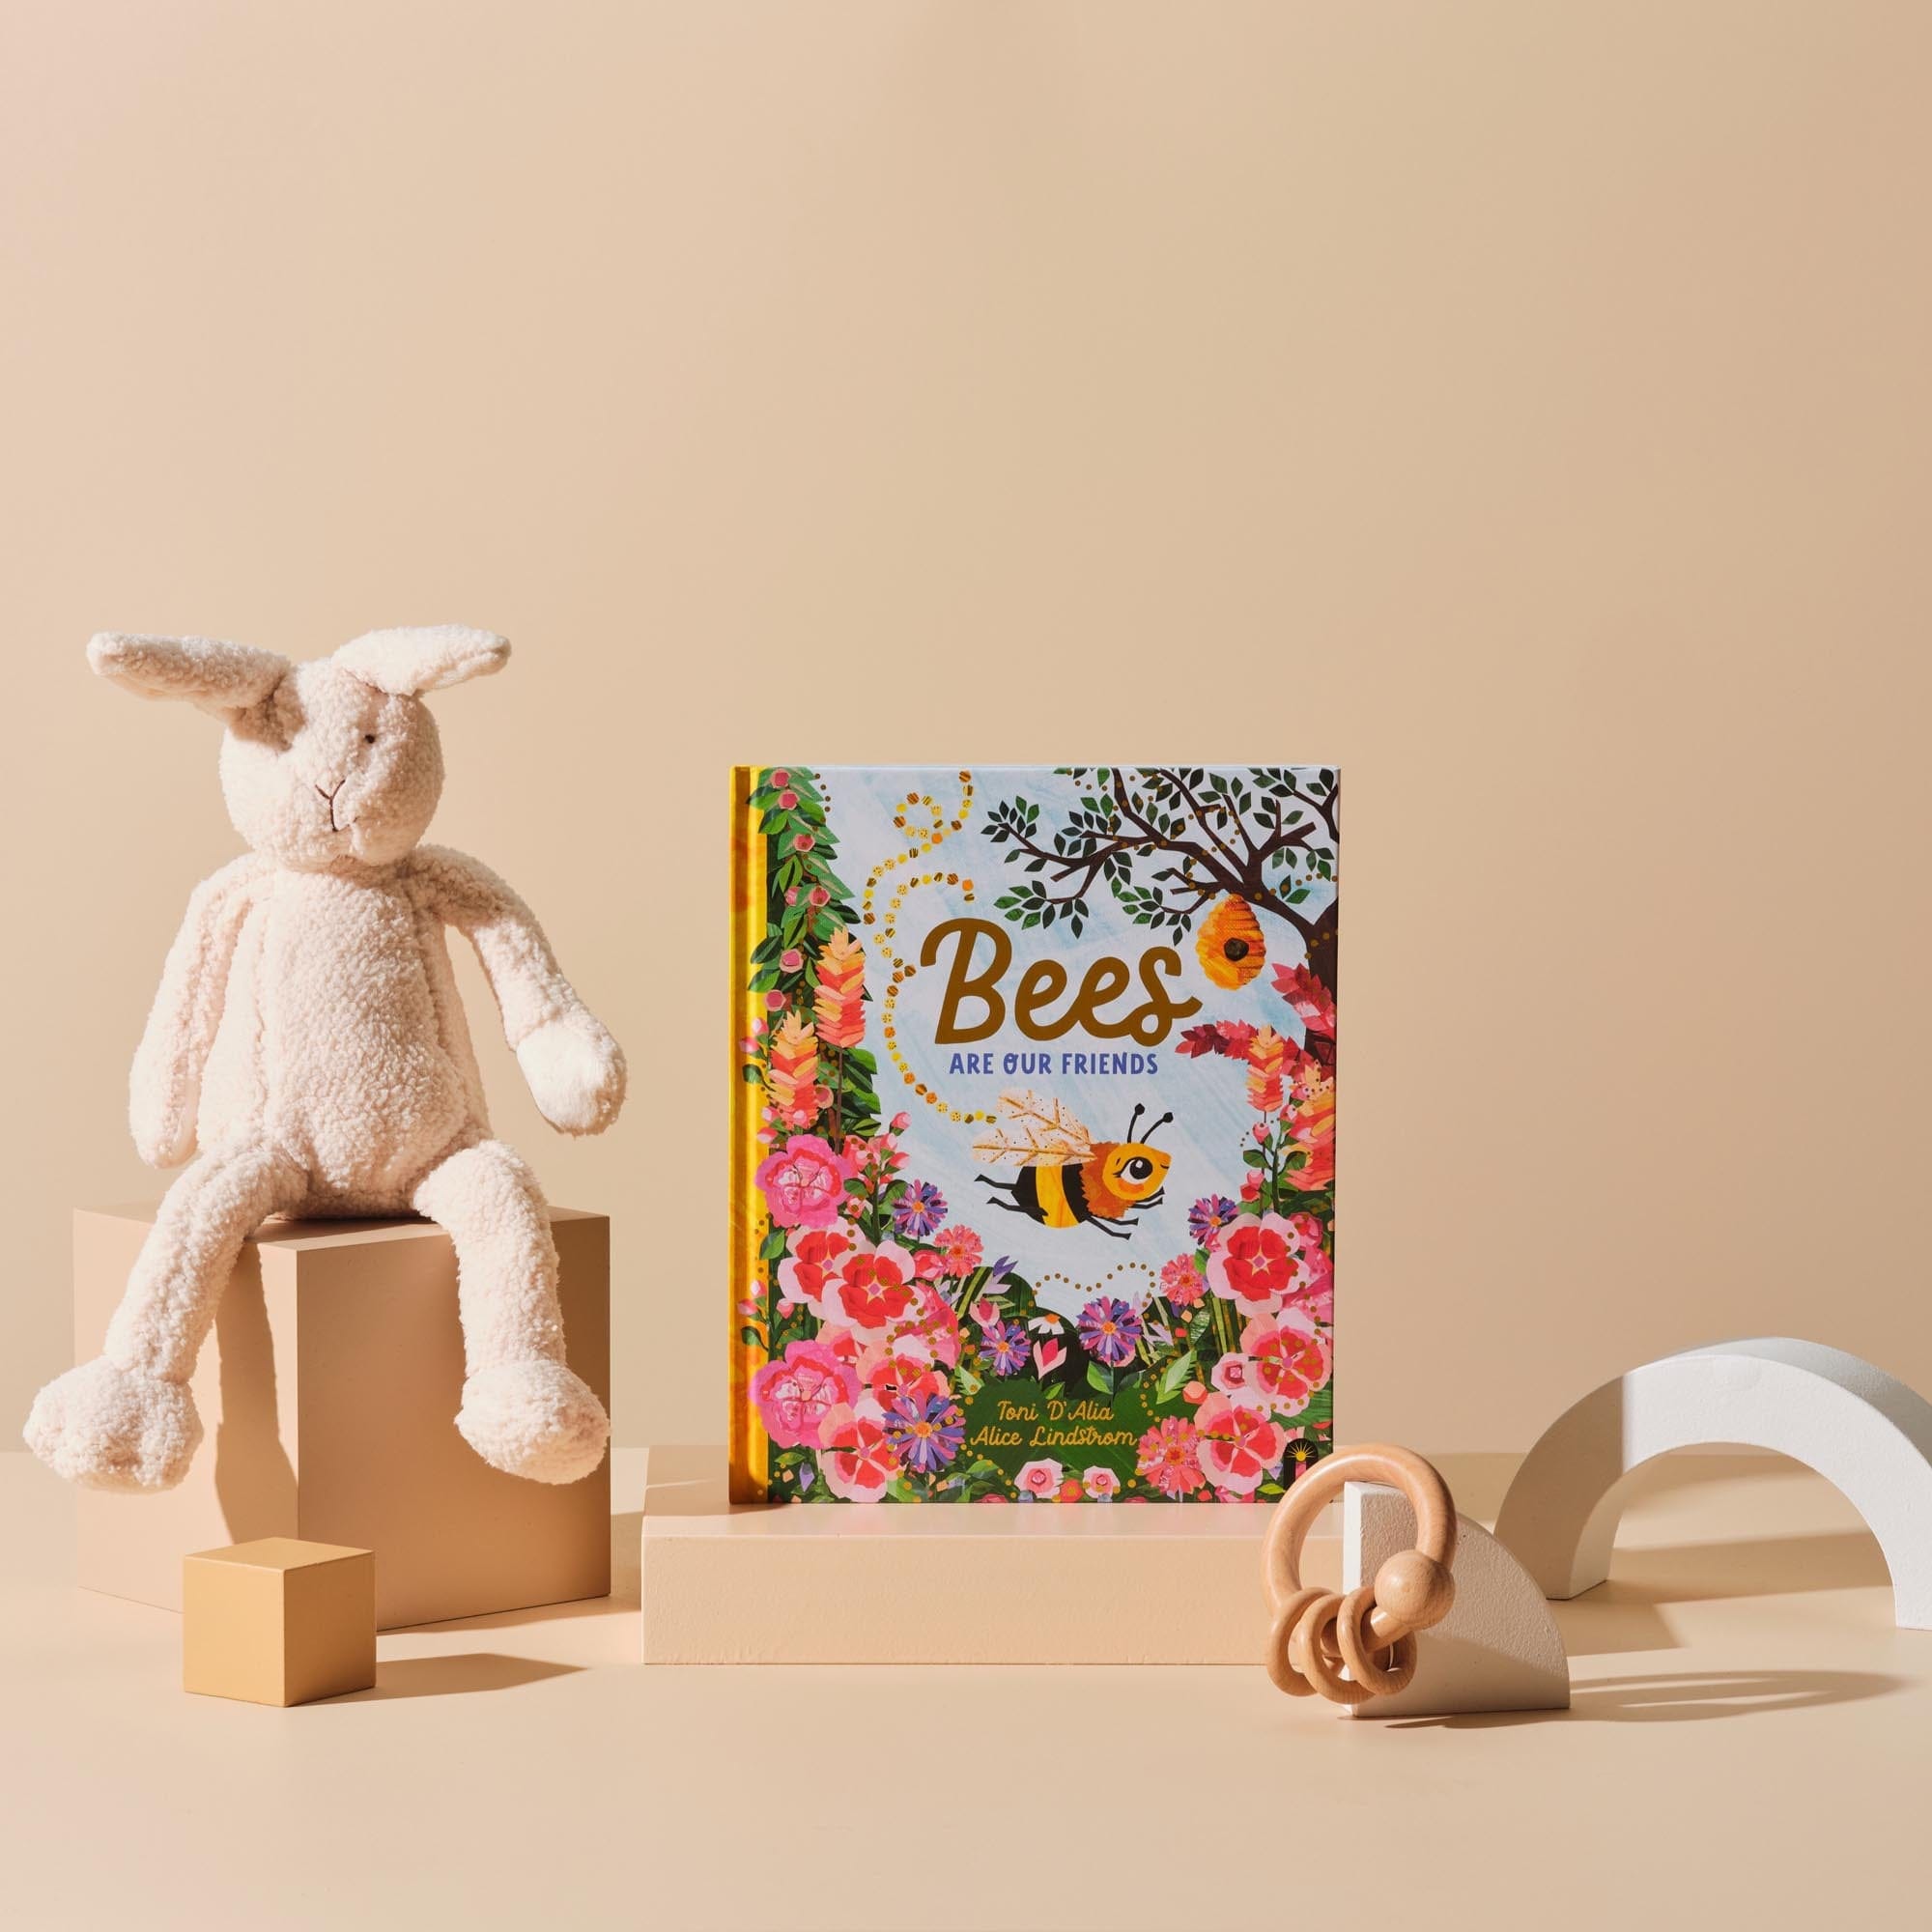 This is the Mum 'n' Bub gift bundle from Handsel. Included in this image is Bees are our friends, Bonnie the Bunny and a teething ring